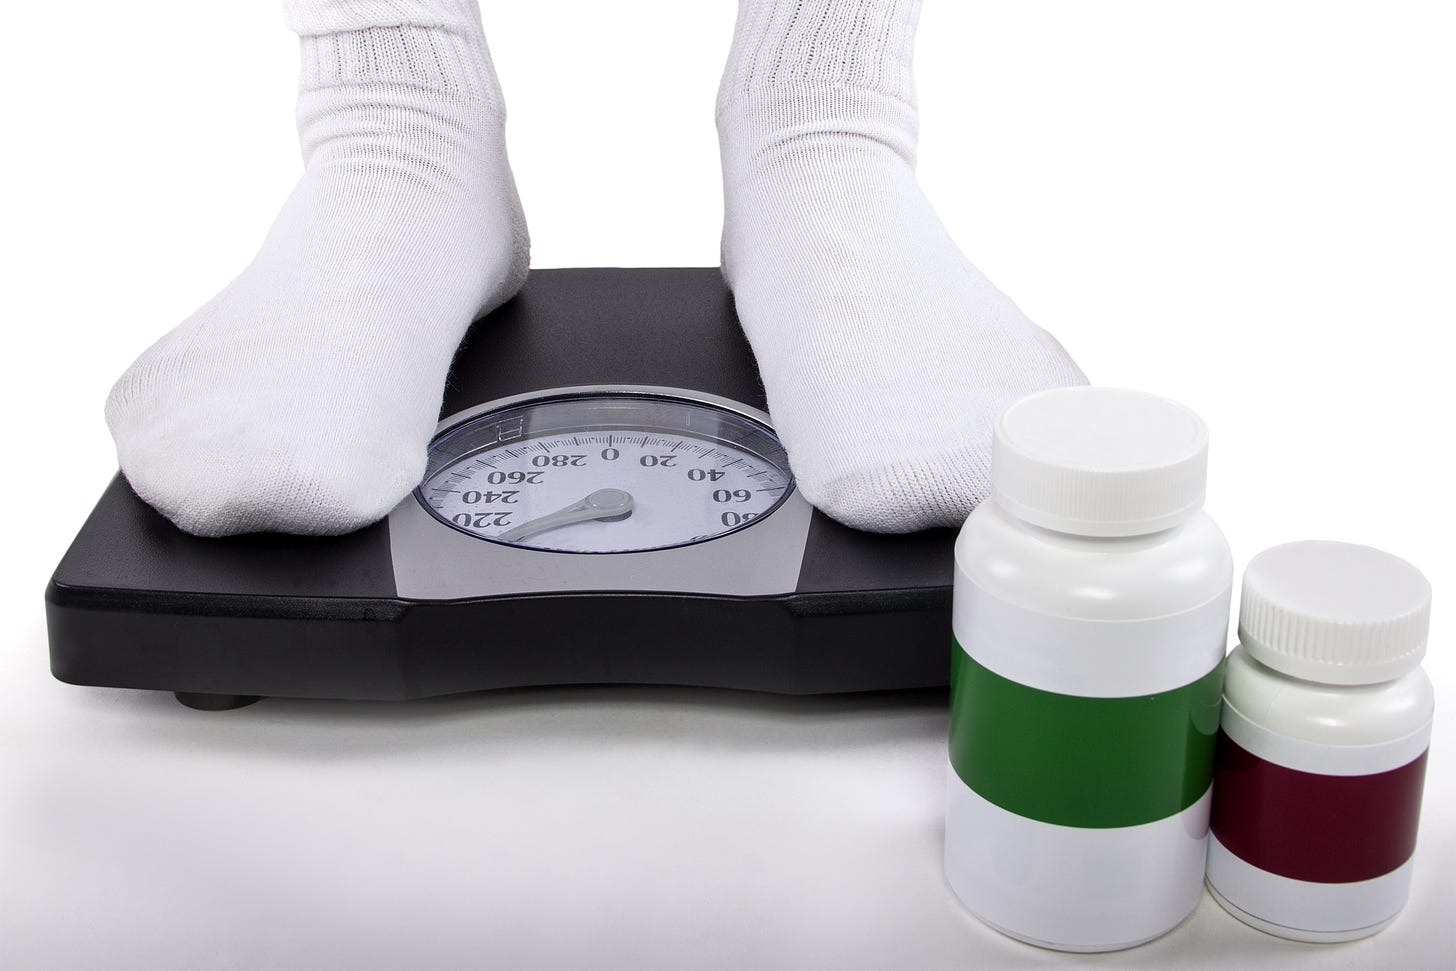 Should You Take A Weight Loss Drug? - Latest What Your GP Doesn't Tell You Podcast